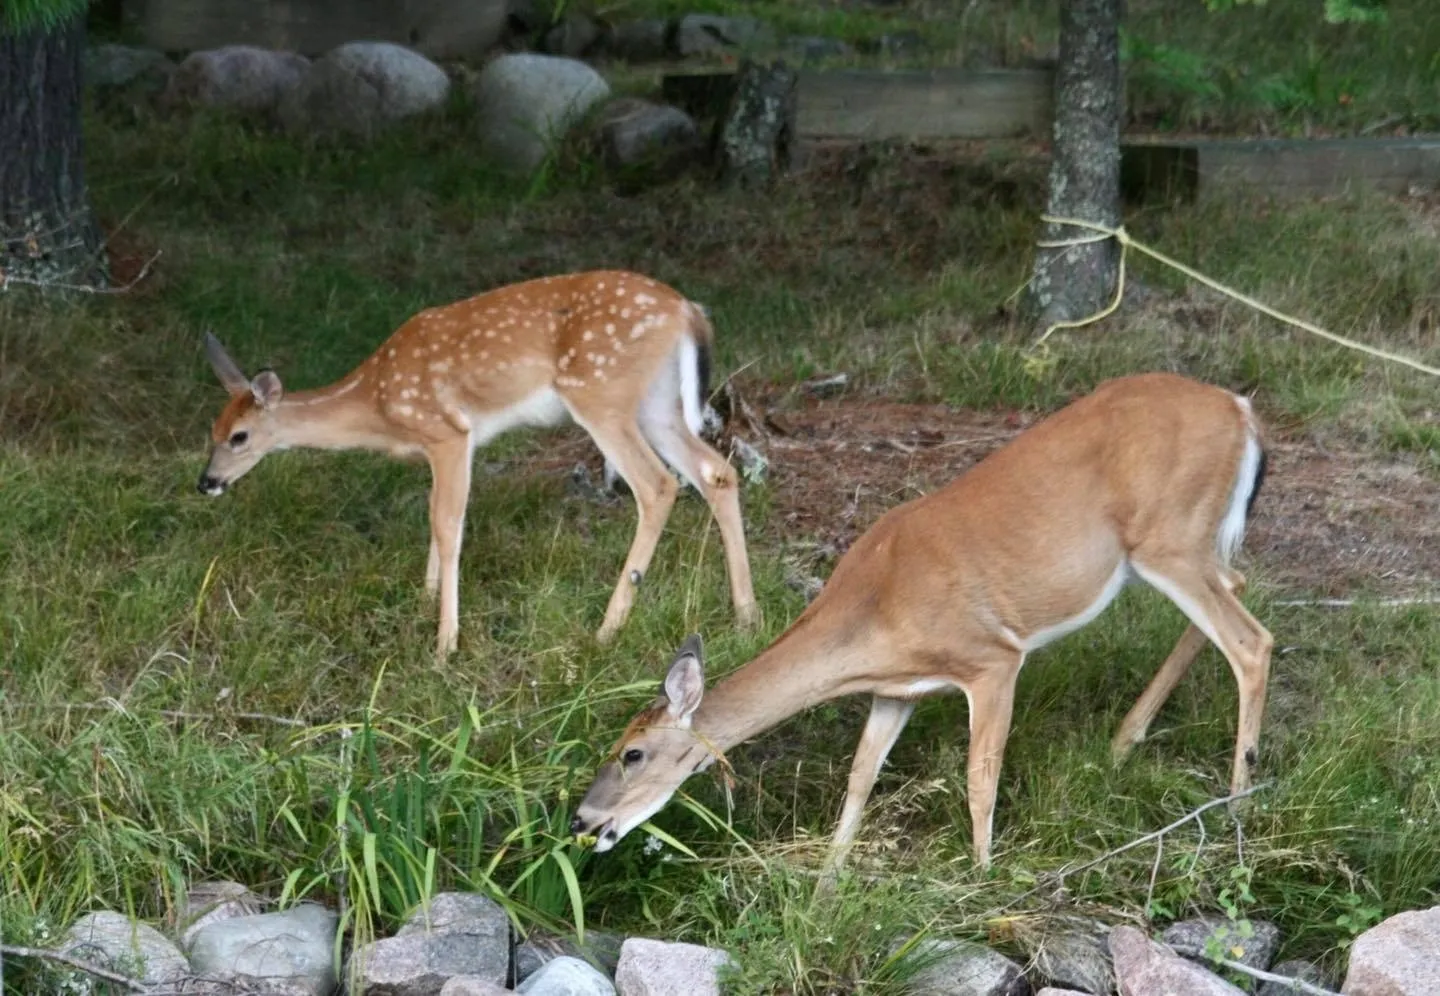 View of two deers on display of the website